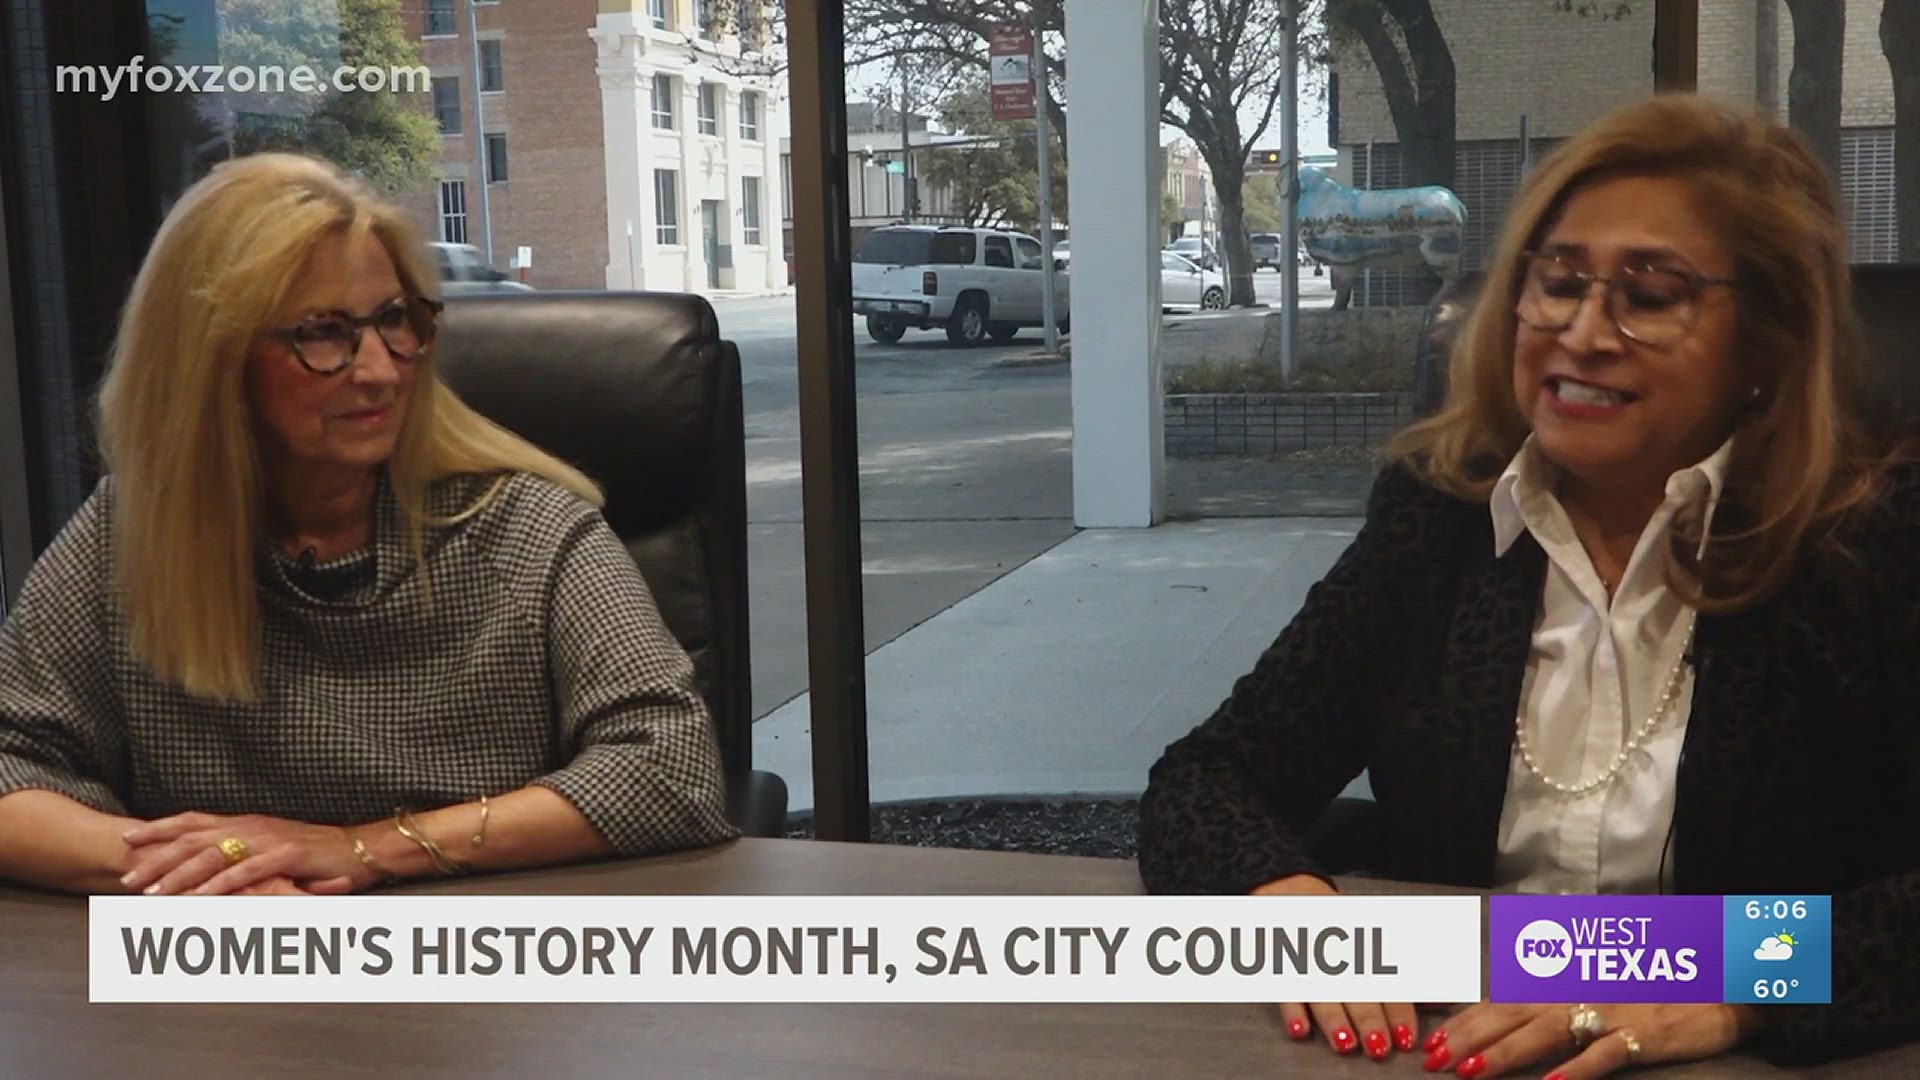 San Angelo City Council members Lucy Gonzales and Karen Hesse Smith speak on the importance of being women in leadership roles.